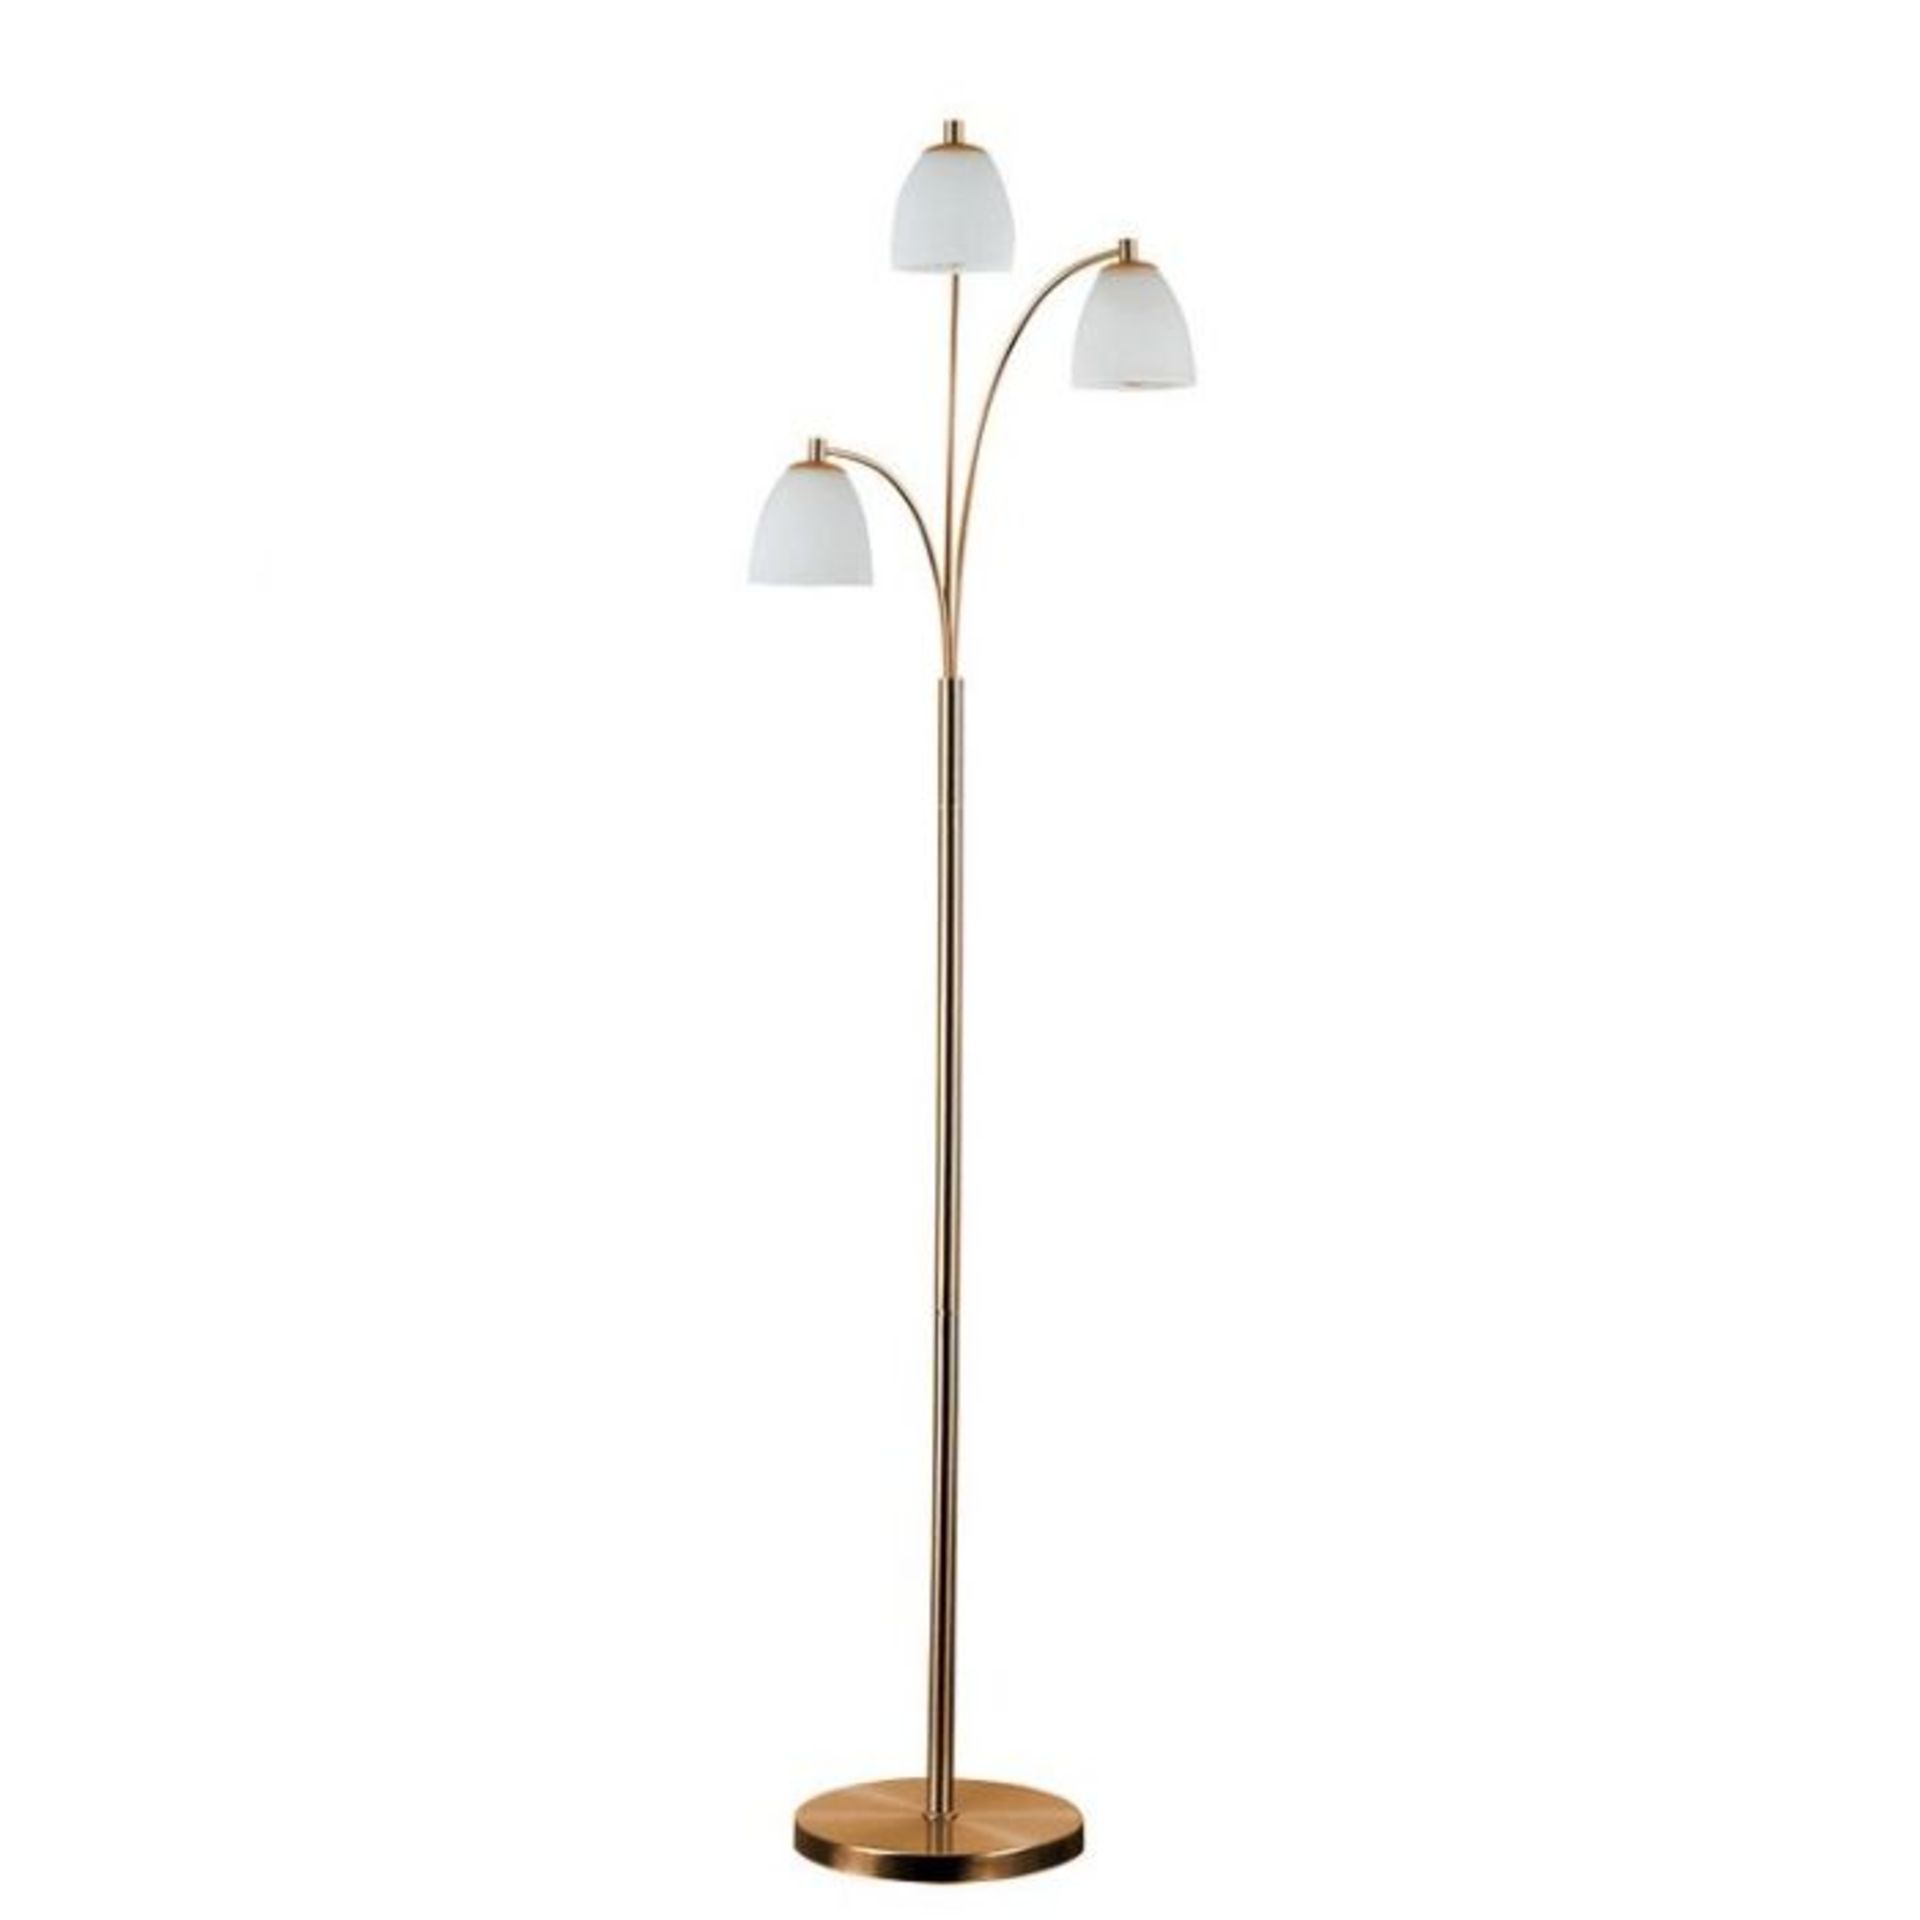 17 Stories, Isma 150cm Floor Lamp (FROSTED) - RRP £73.99 (MSUN3055 - 26949/24)